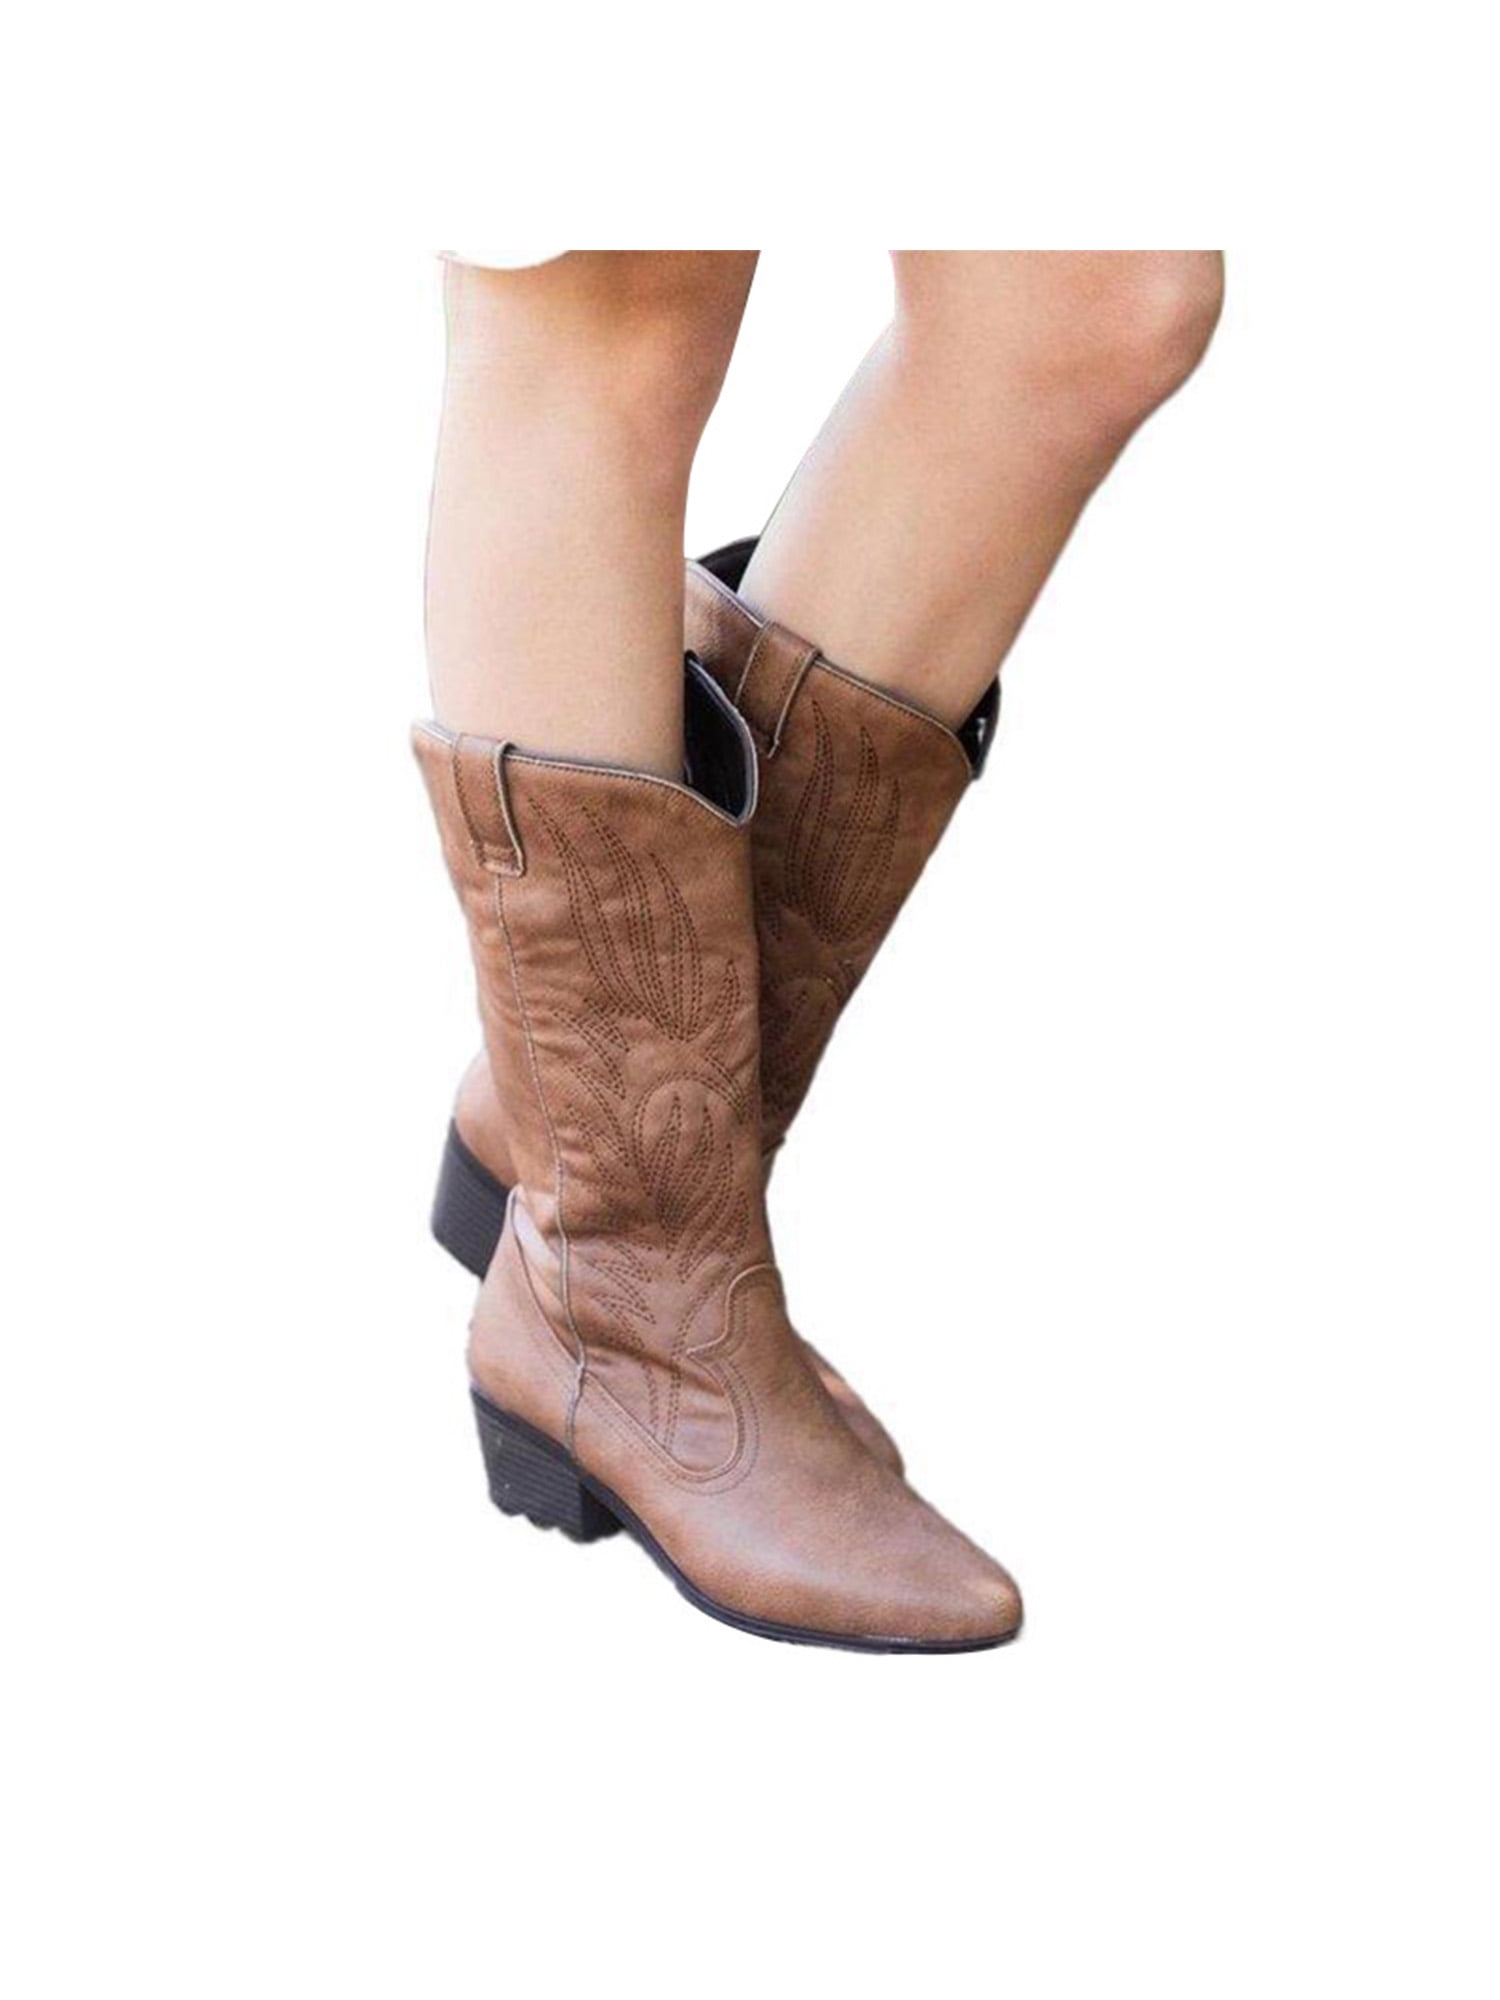 Cowboy Boots for Women Leather Women's Solid Color Ruched Boots Mid Calf Retro Pointed Toe Boots Side Zip up Western Shoes